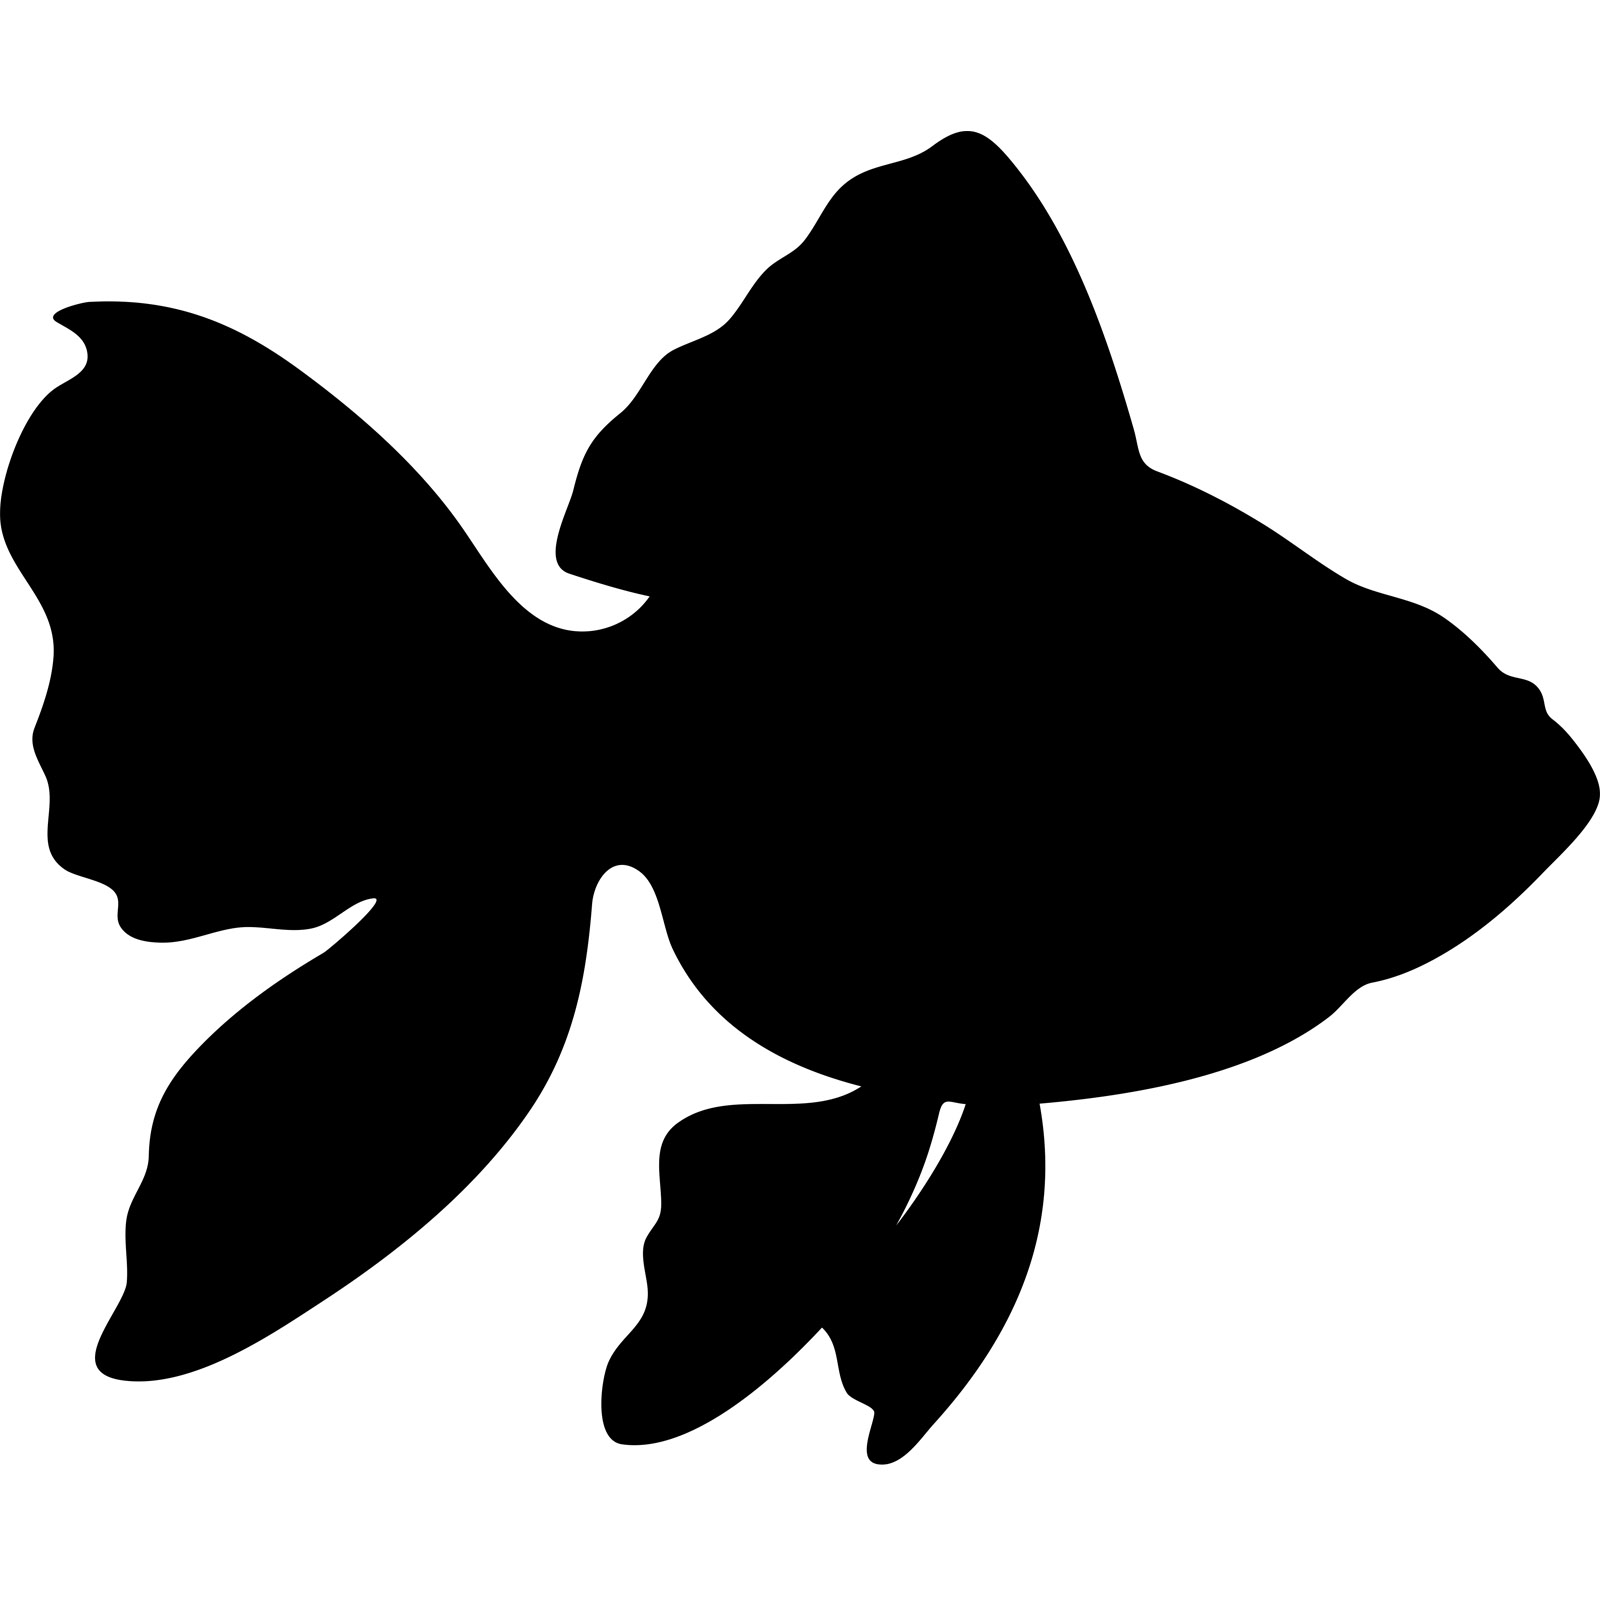 Tropical fish clipart silhouette